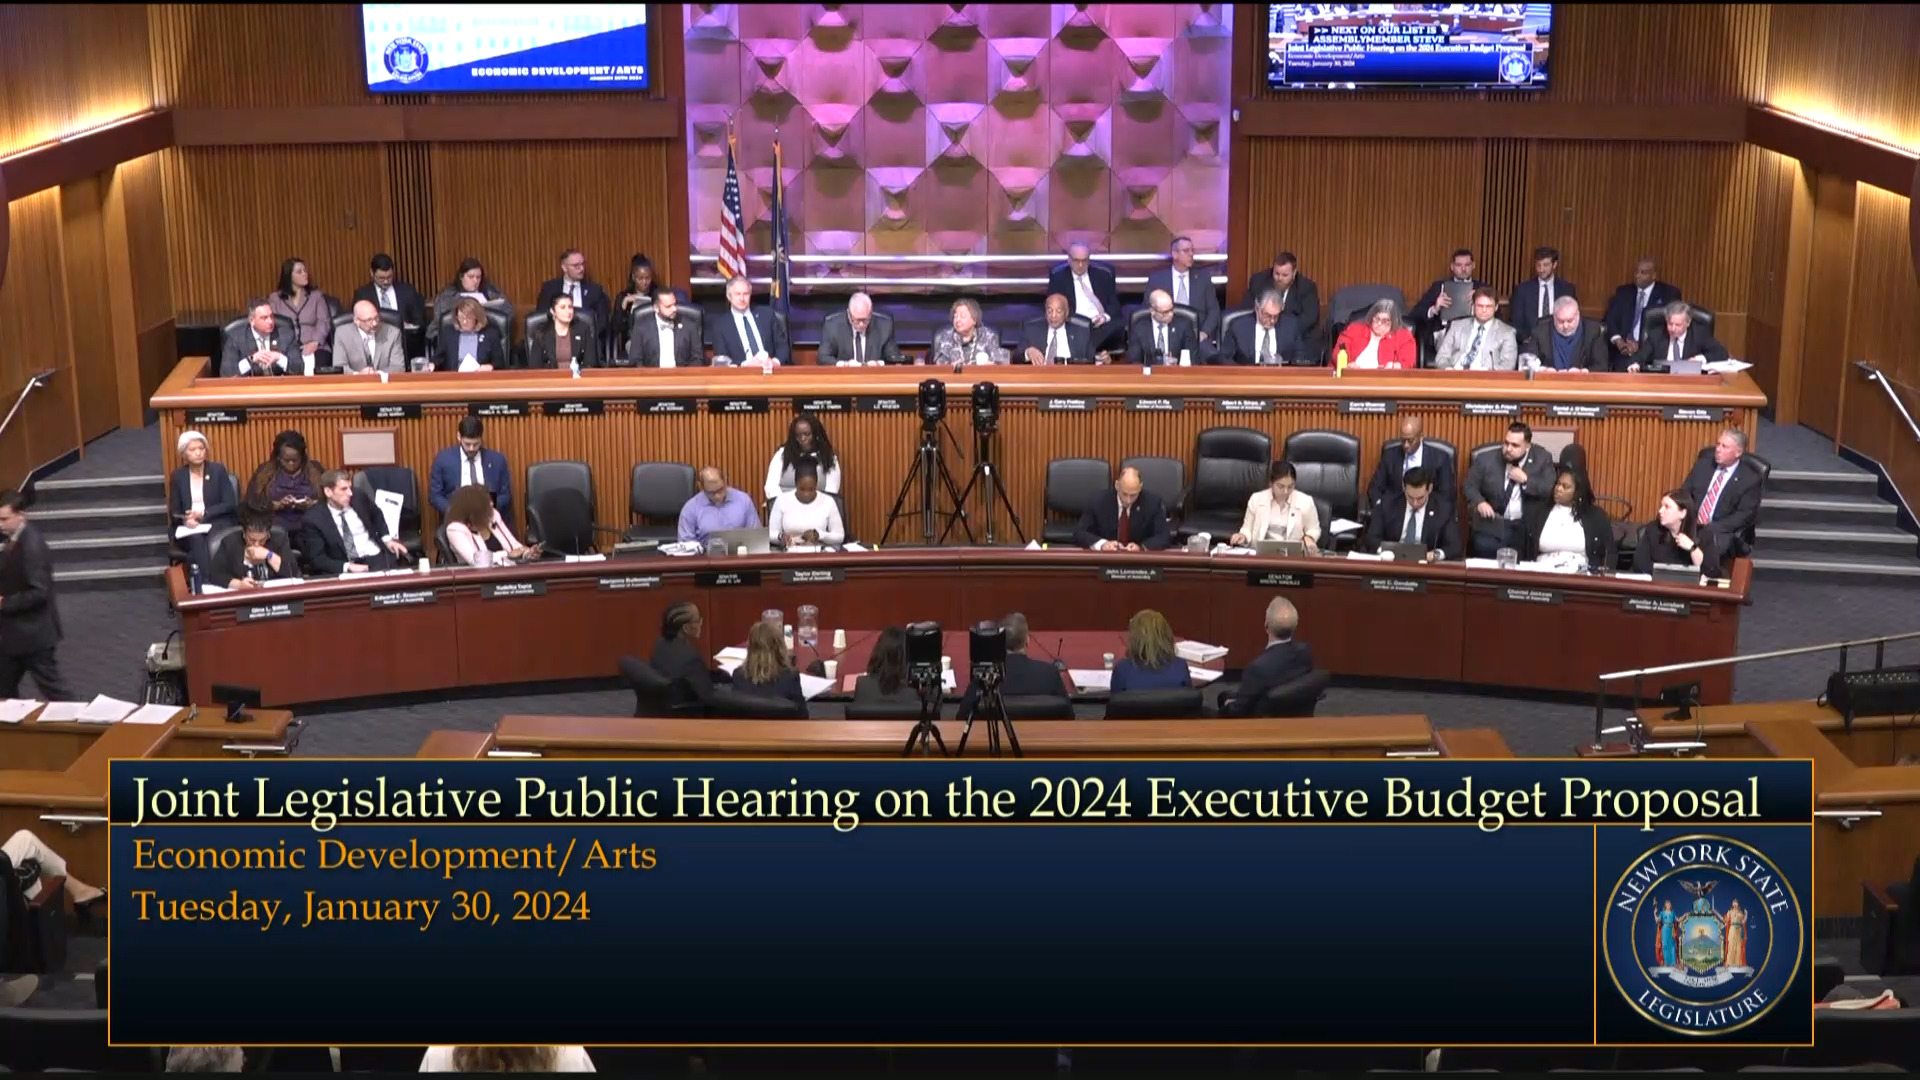 Otis Questions State Commissioners During Budget Hearing on Economic Development and the Arts